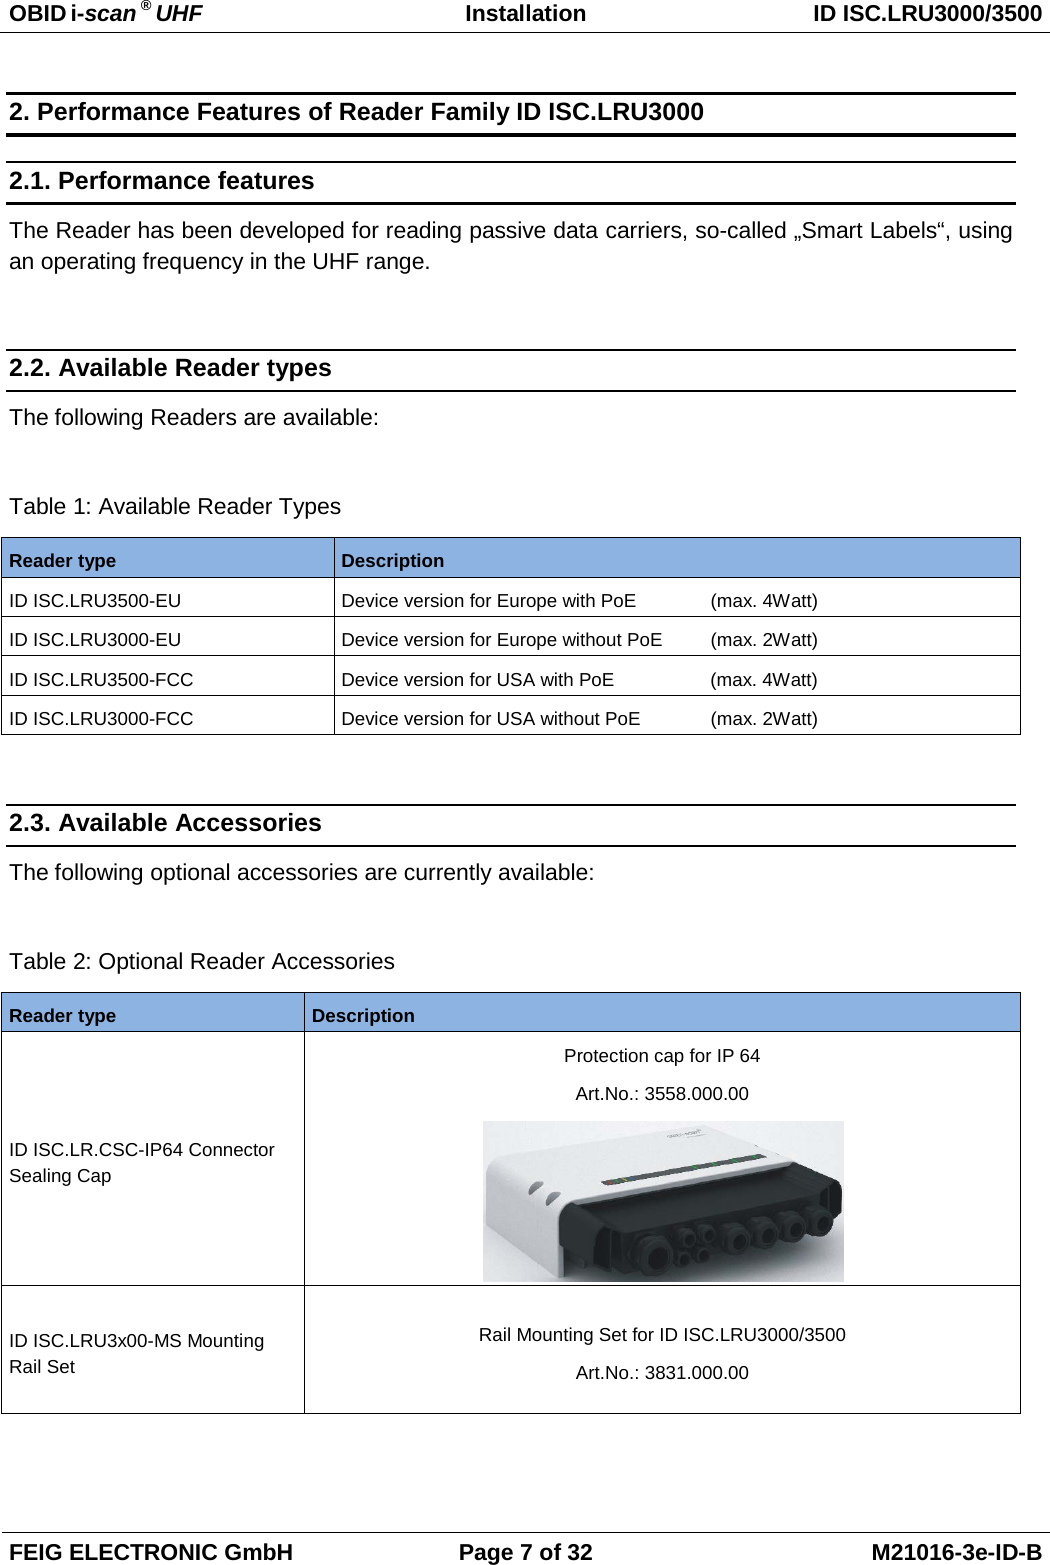 OBID i-scan ® UHF Installation ID ISC.LRU3000/3500  FEIG ELECTRONIC GmbH Page 7 of 32 M21016-3e-ID-B  2. Performance Features of Reader Family ID ISC.LRU3000 2.1. Performance features The Reader has been developed for reading passive data carriers, so-called „Smart Labels“, using an operating frequency in the UHF range.  2.2. Available Reader types The following Readers are available:  Table 1: Available Reader Types Reader type Description ID ISC.LRU3500-EU  Device version for Europe with PoE   (max. 4Watt) ID ISC.LRU3000-EU  Device version for Europe without PoE   (max. 2Watt) ID ISC.LRU3500-FCC Device version for USA with PoE      (max. 4Watt) ID ISC.LRU3000-FCC Device version for USA without PoE   (max. 2Watt)  2.3. Available Accessories The following optional accessories are currently available:  Table 2: Optional Reader Accessories Reader type Description ID ISC.LR.CSC-IP64 Connector Sealing Cap Protection cap for IP 64 Art.No.: 3558.000.00  ID ISC.LRU3x00-MS Mounting Rail Set Rail Mounting Set for ID ISC.LRU3000/3500 Art.No.: 3831.000.00  